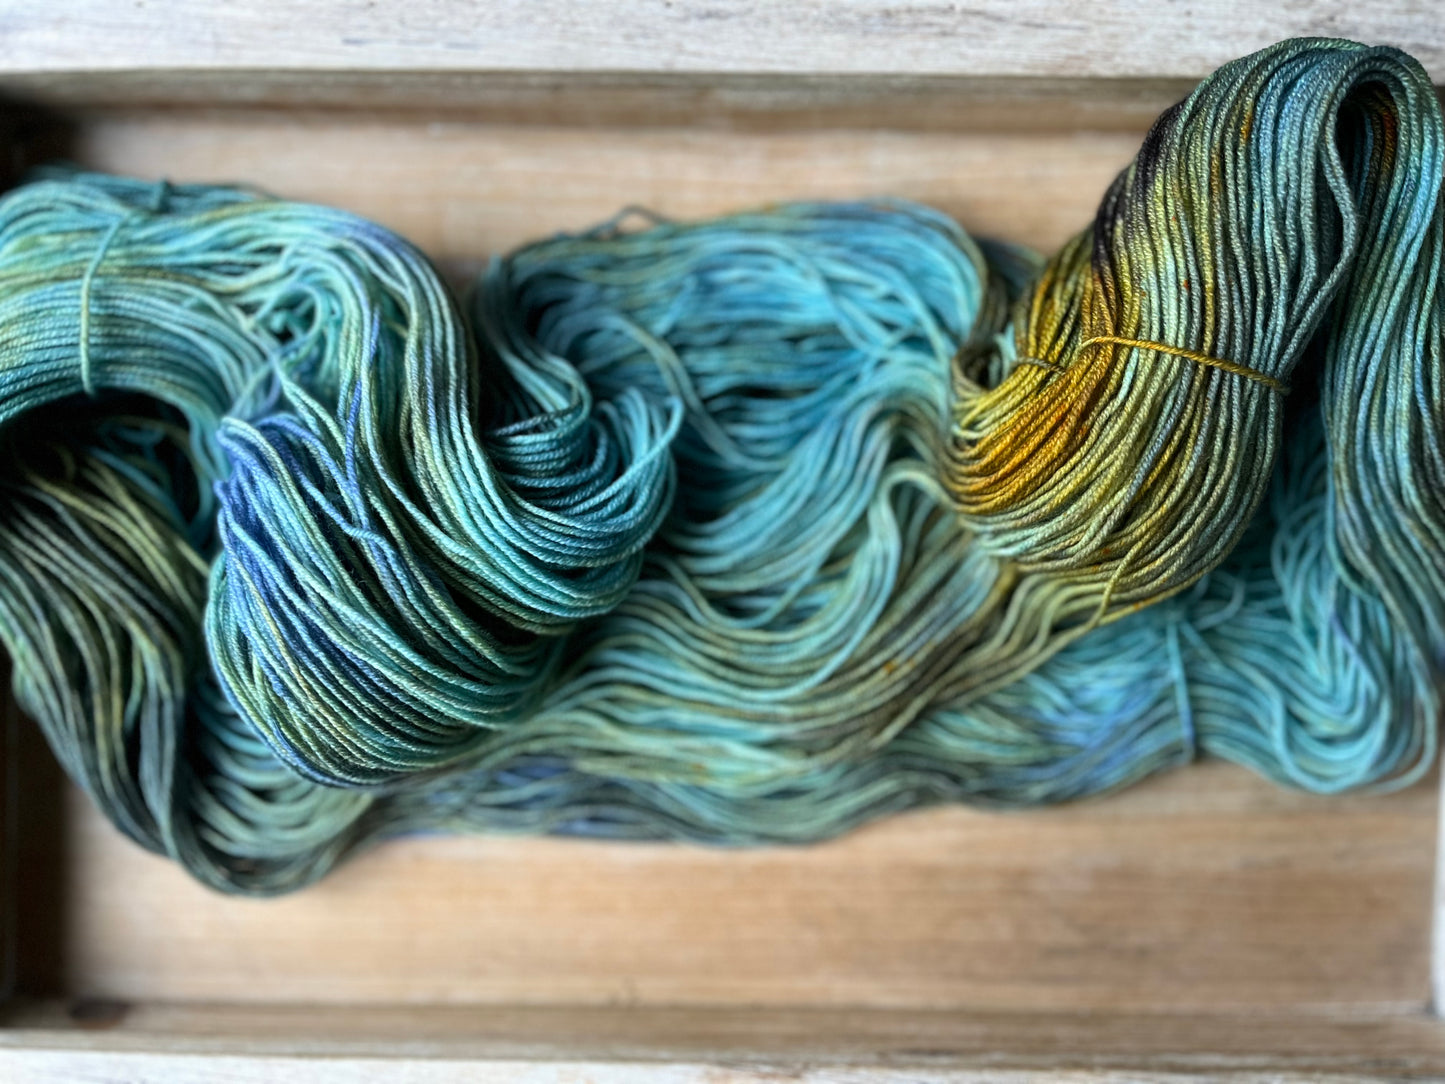 5 Skein Fade on Squishy Sock Base